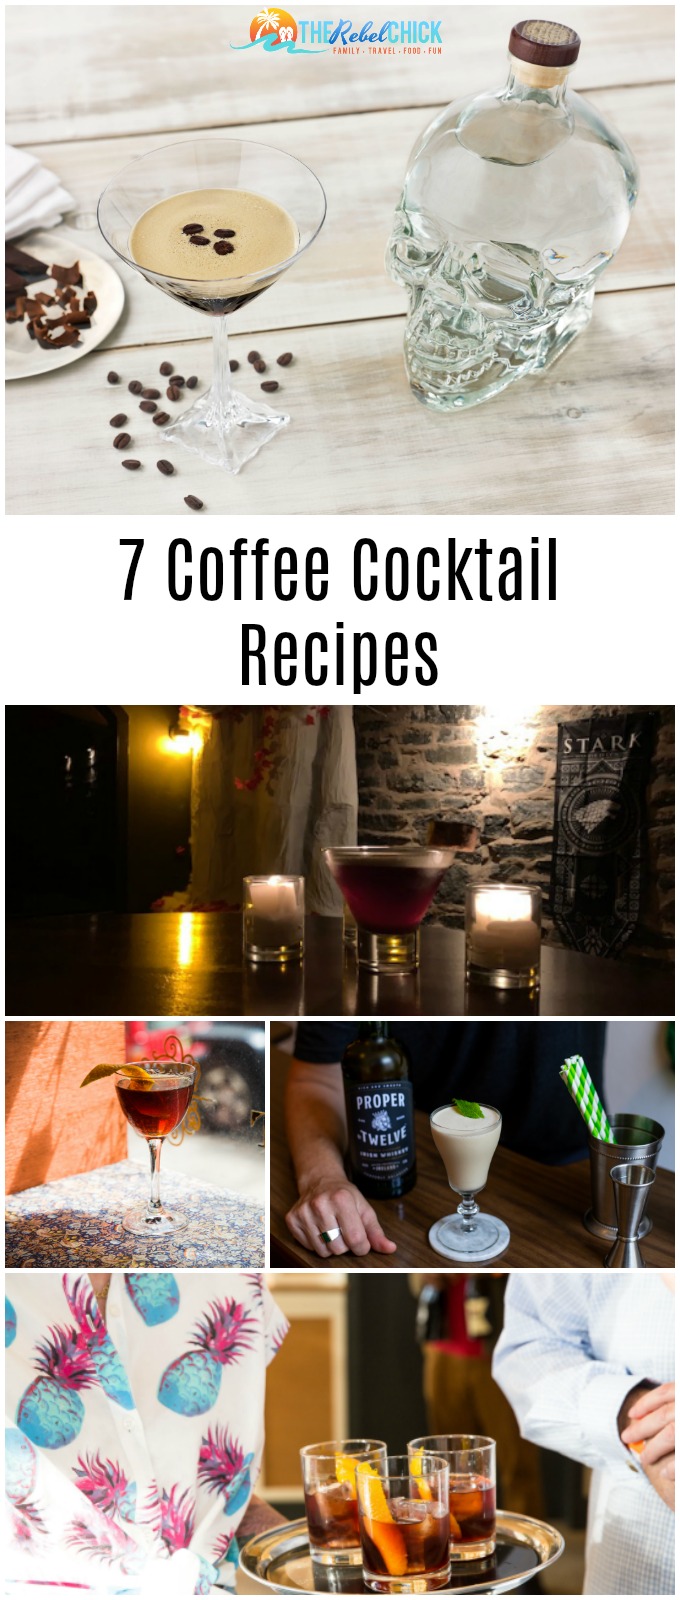 7 Coffee Cocktail Recipes